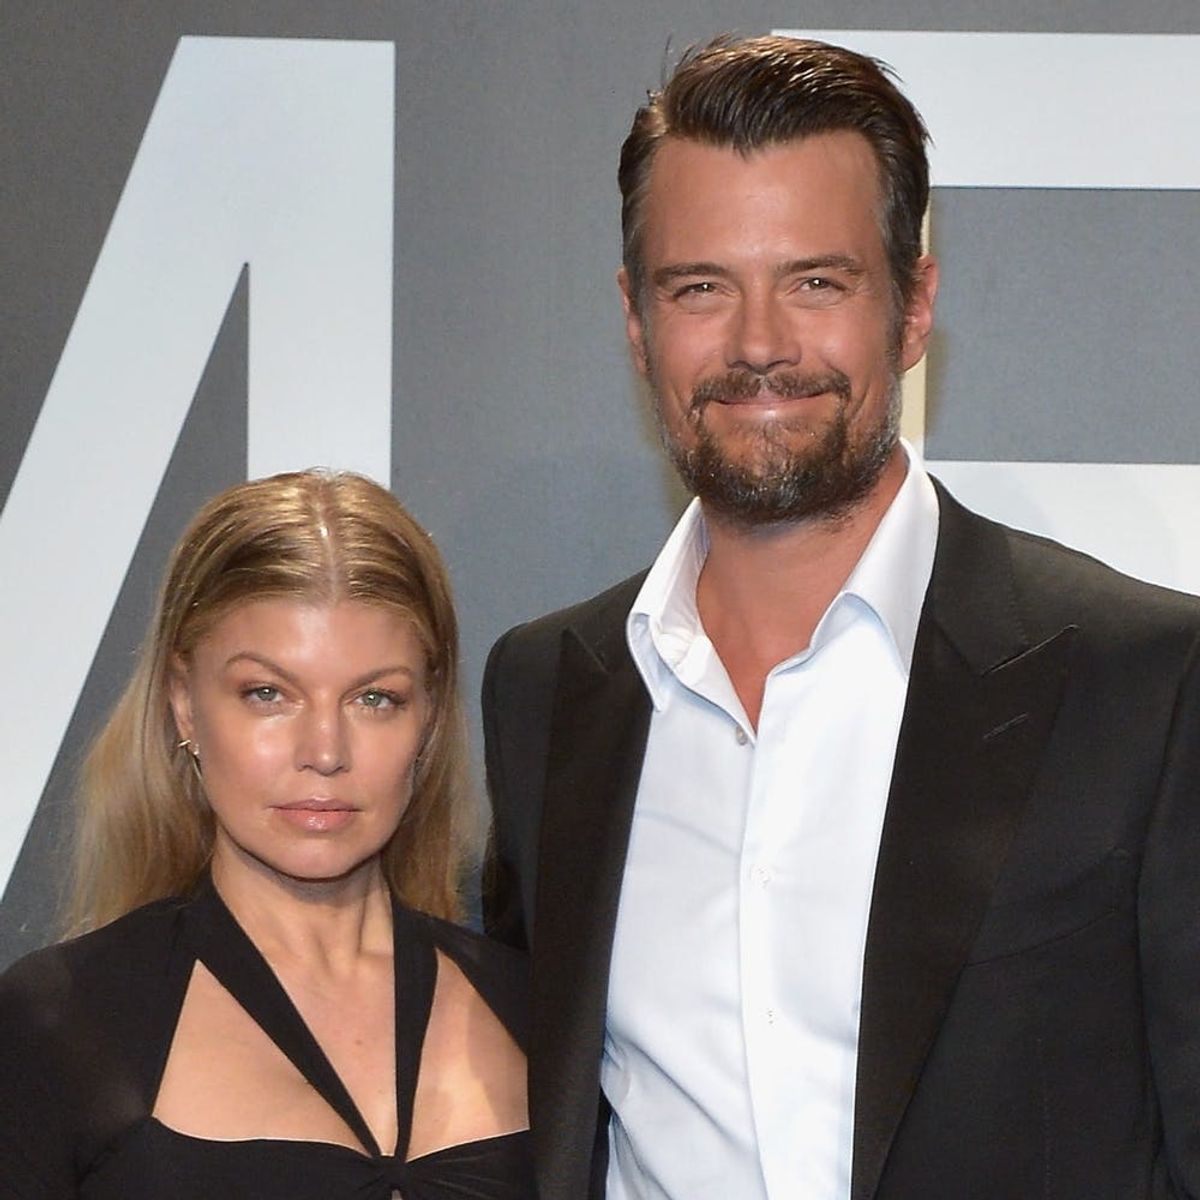 Fergie Reveals the Real Reason She and Josh Duhamel Went Public With Their Split